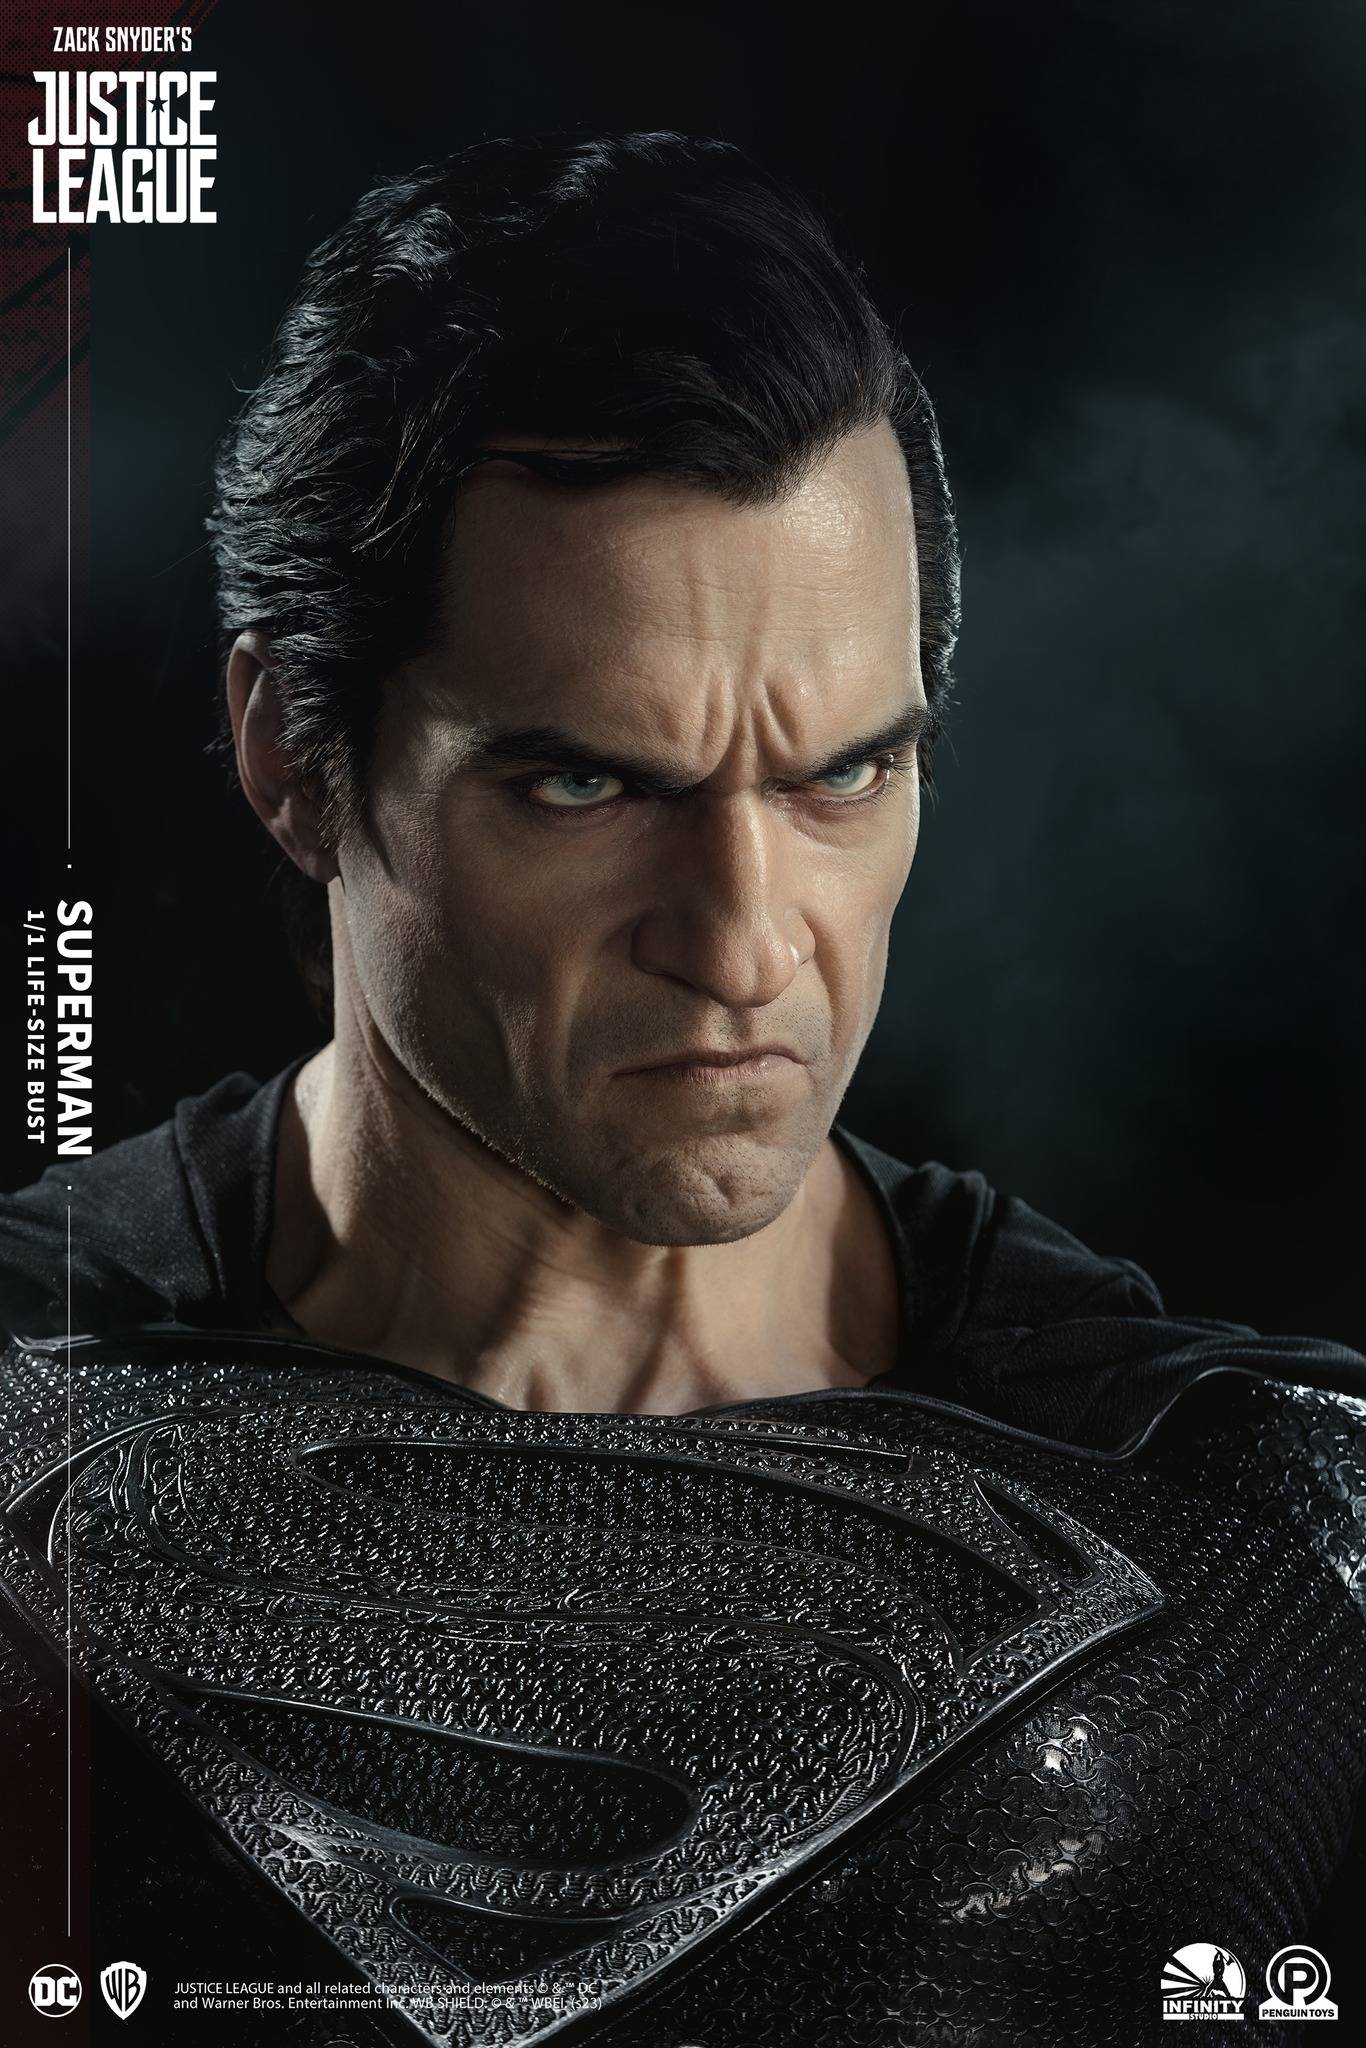 Life Size Justice League Superman Statue 1:1 Henry Cavill Full Size Prop